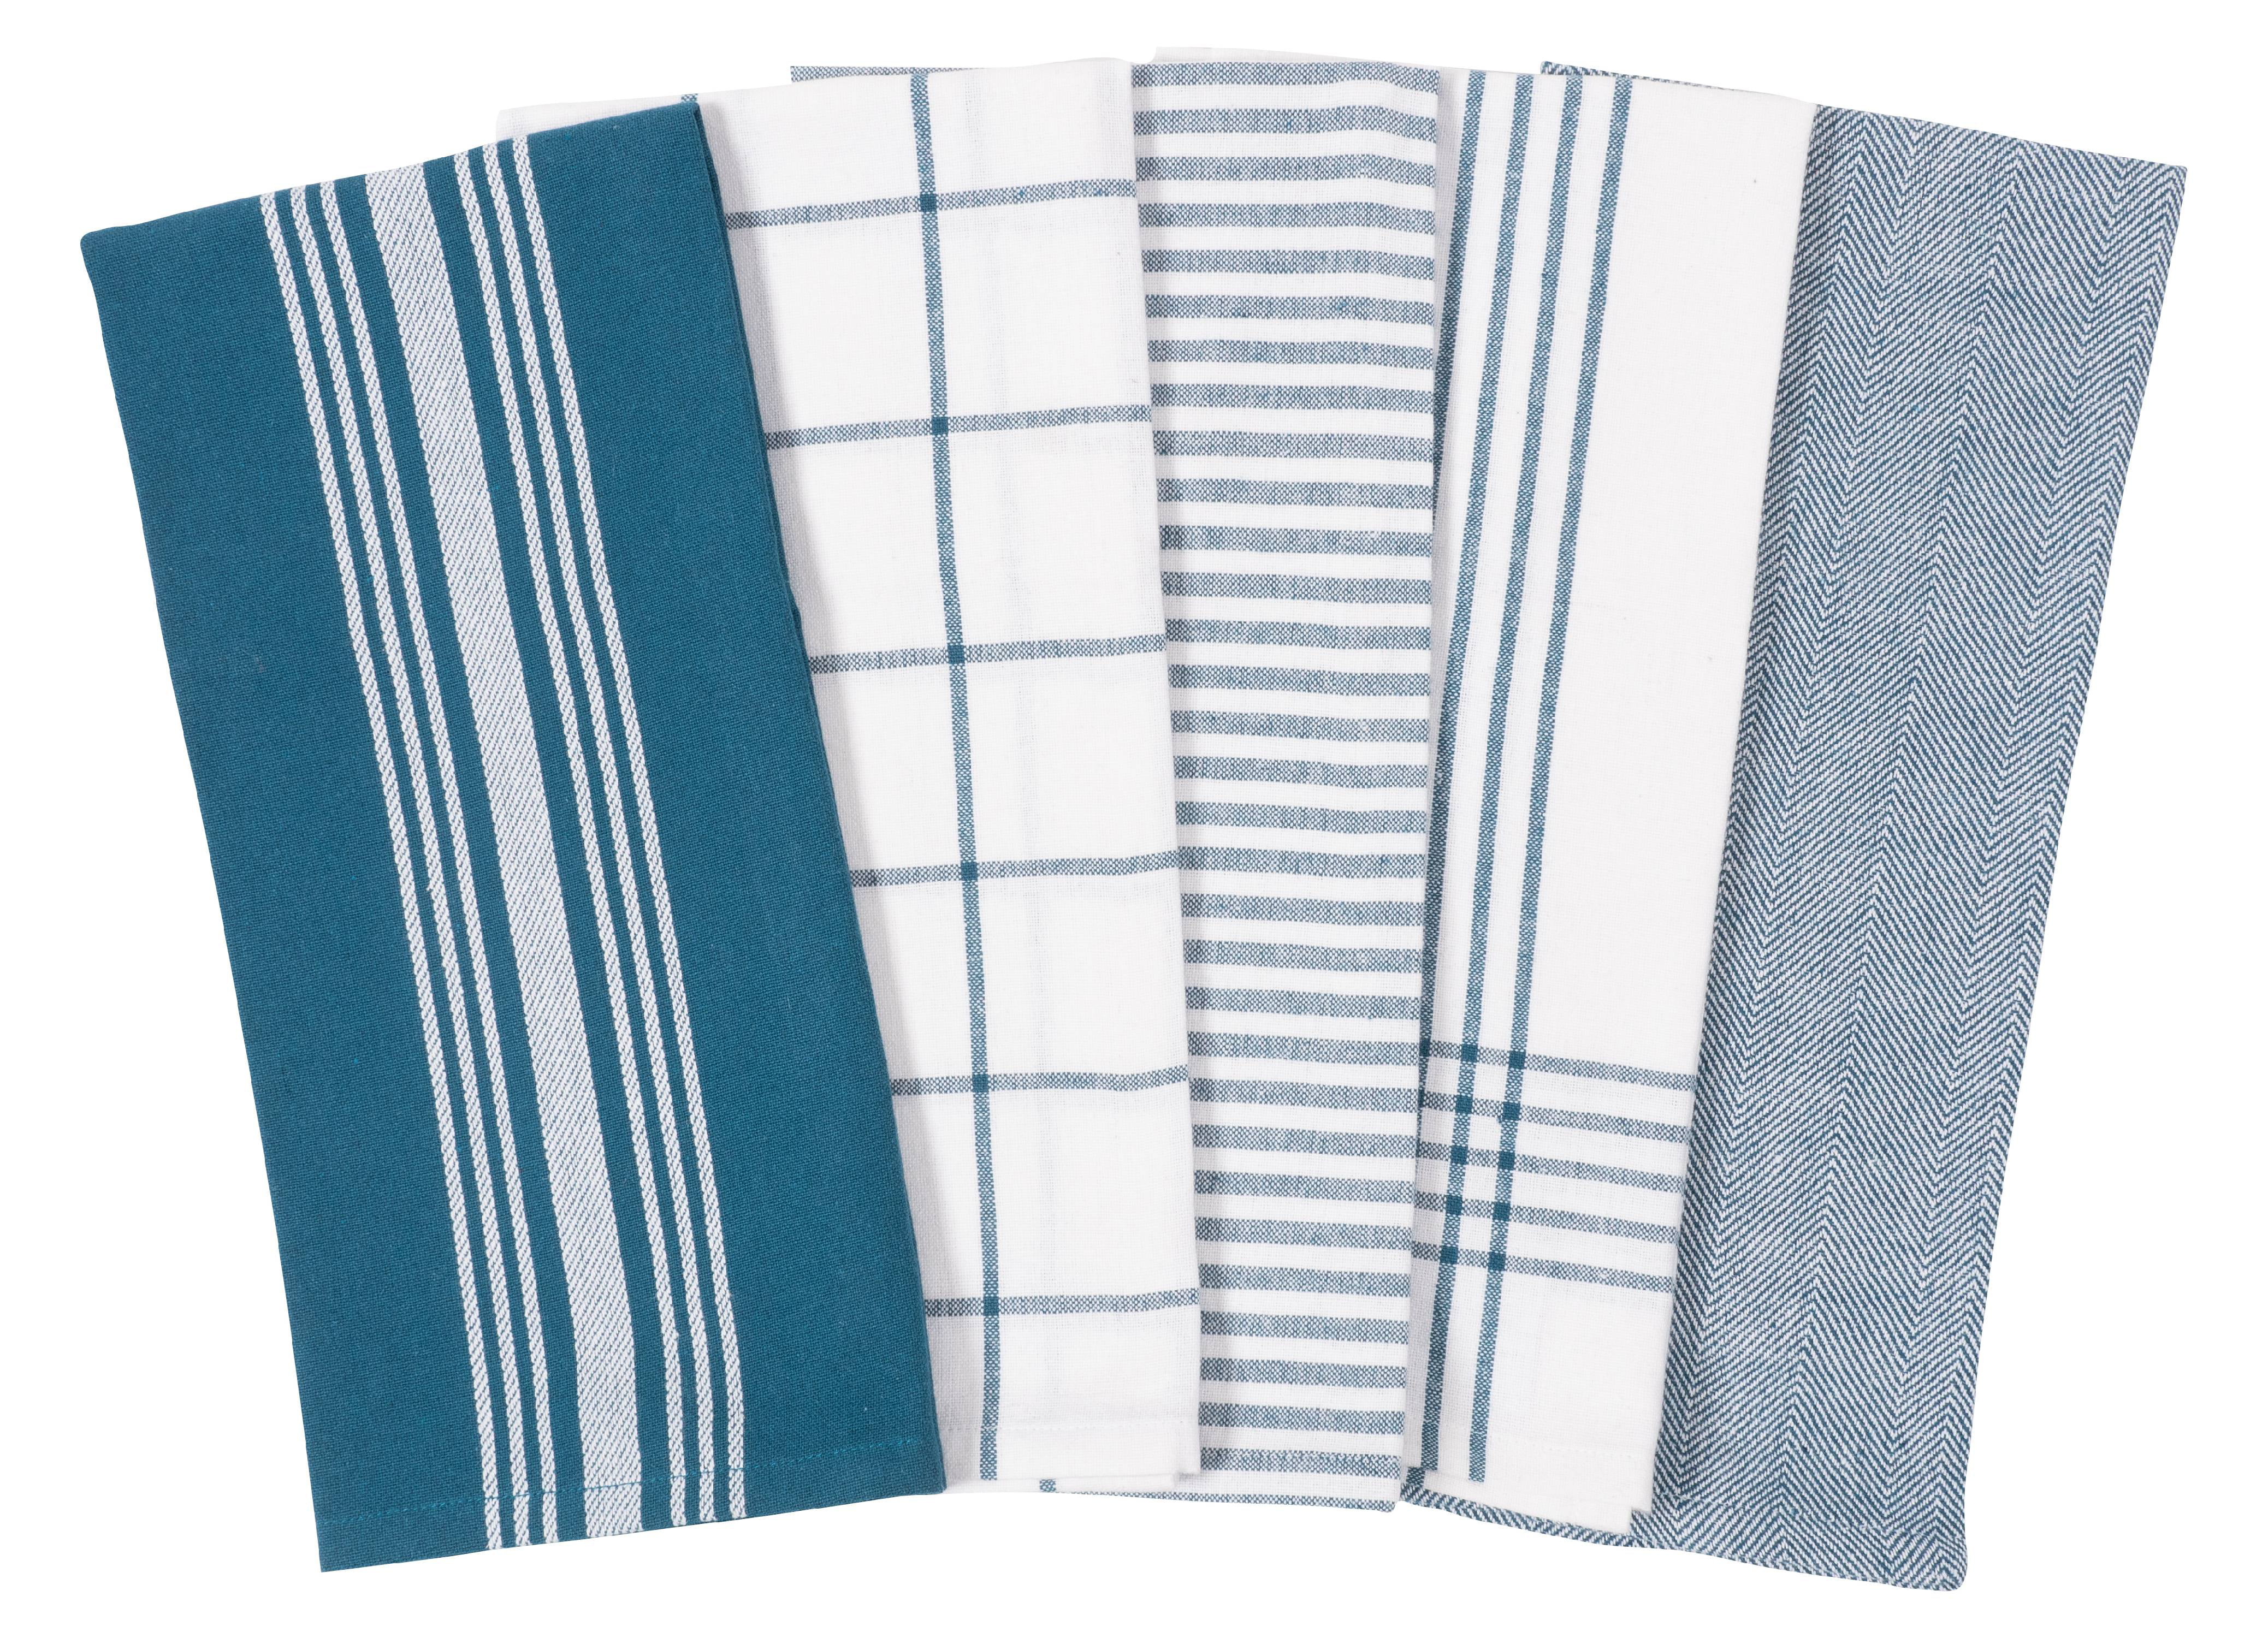 Kaf Home Assorted Flat Kitchen Towels, Set Of 10 Dish Towels, 100% Cotton  - 18 X 28 Inches